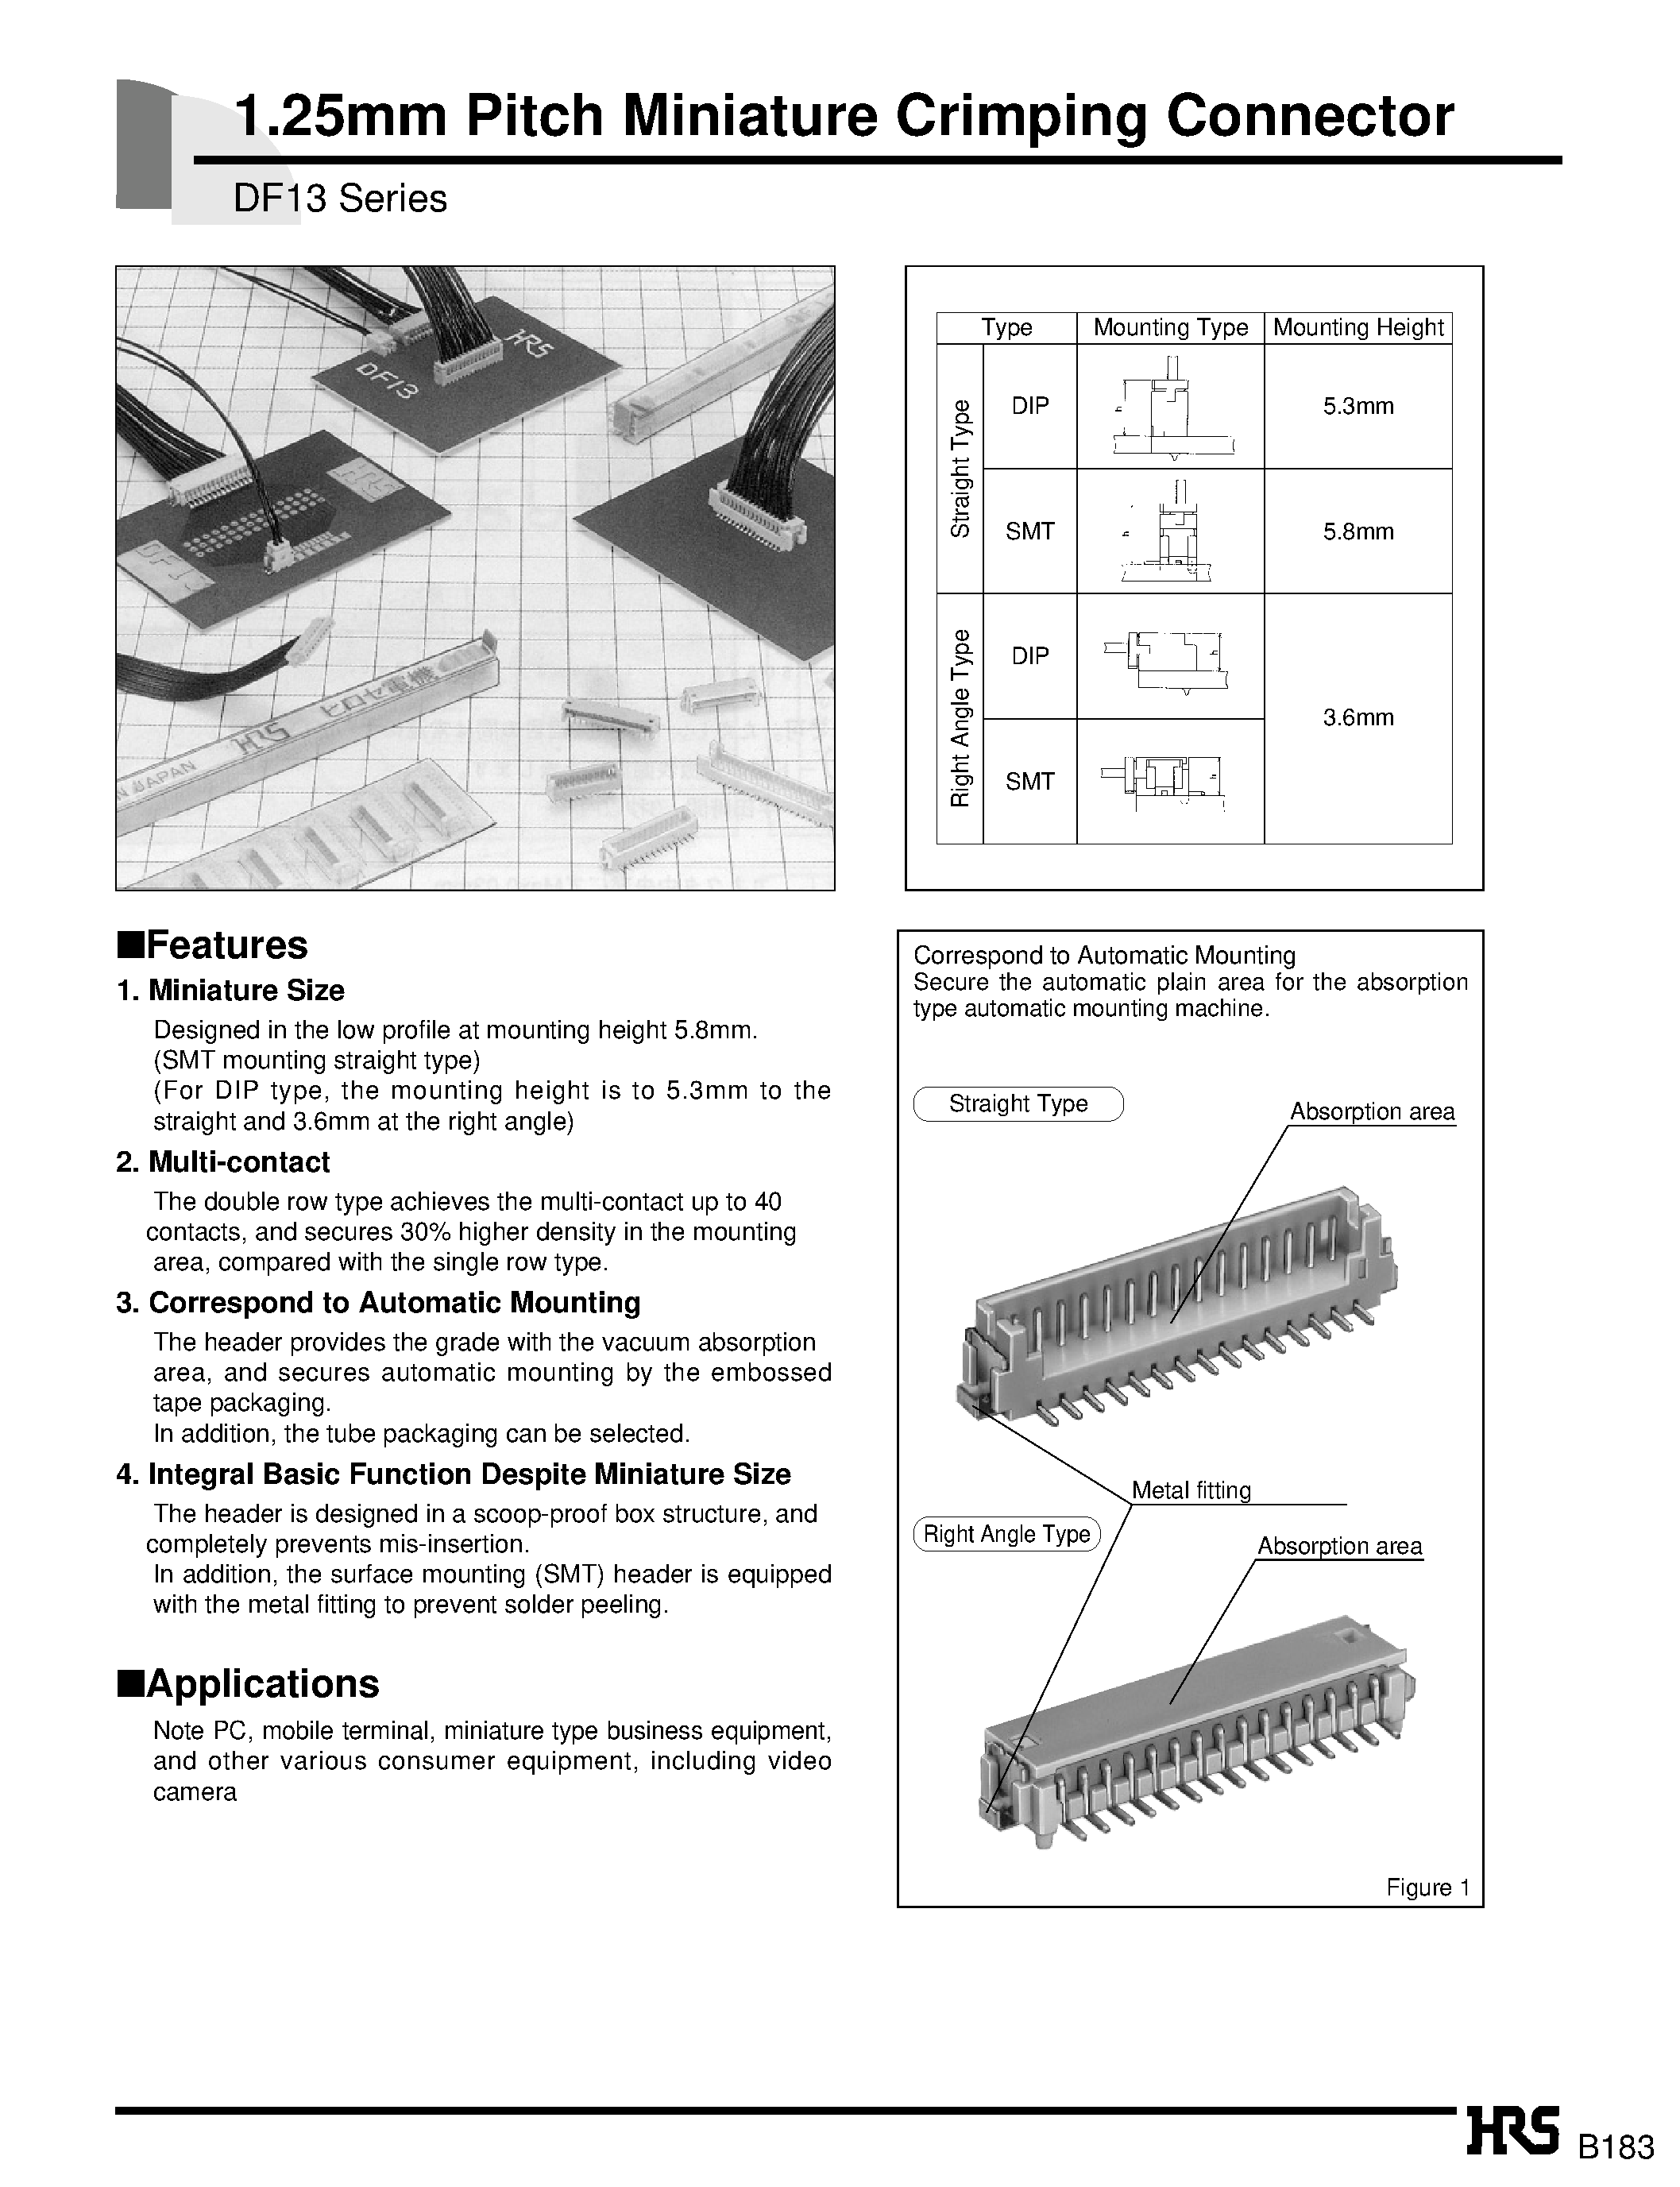 Datasheet DF13-11S-1.25H - 1.25mm Pitch Miniature Crimping Connector page 1